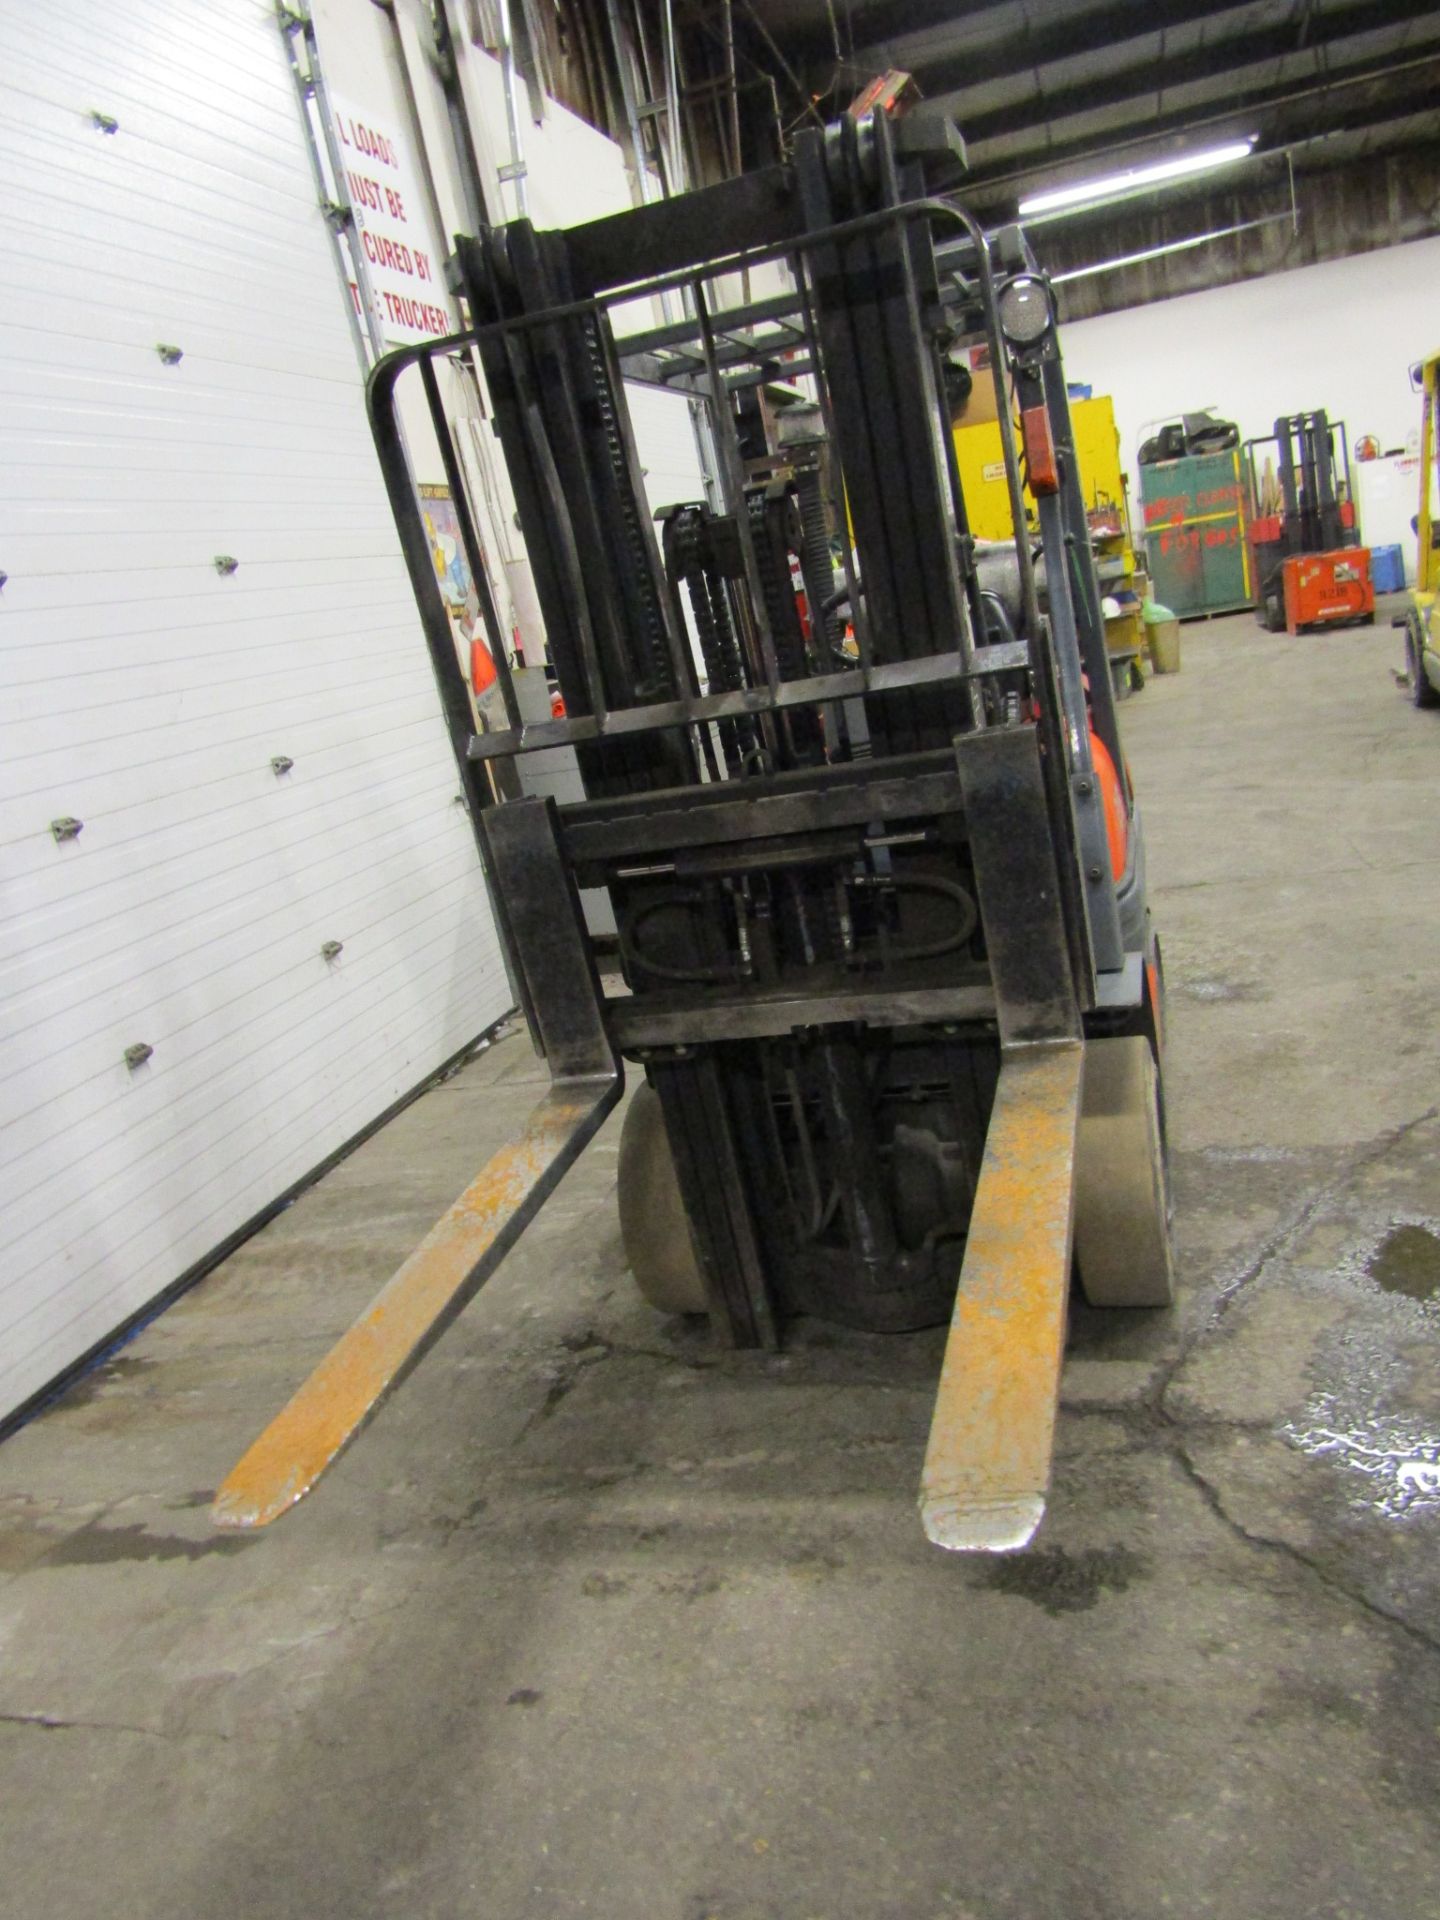 Toyota 5000lbs Capacity Forklift - Certified into 2017 - LPG (propane) with 3-stage mast & sideshift - Image 2 of 2